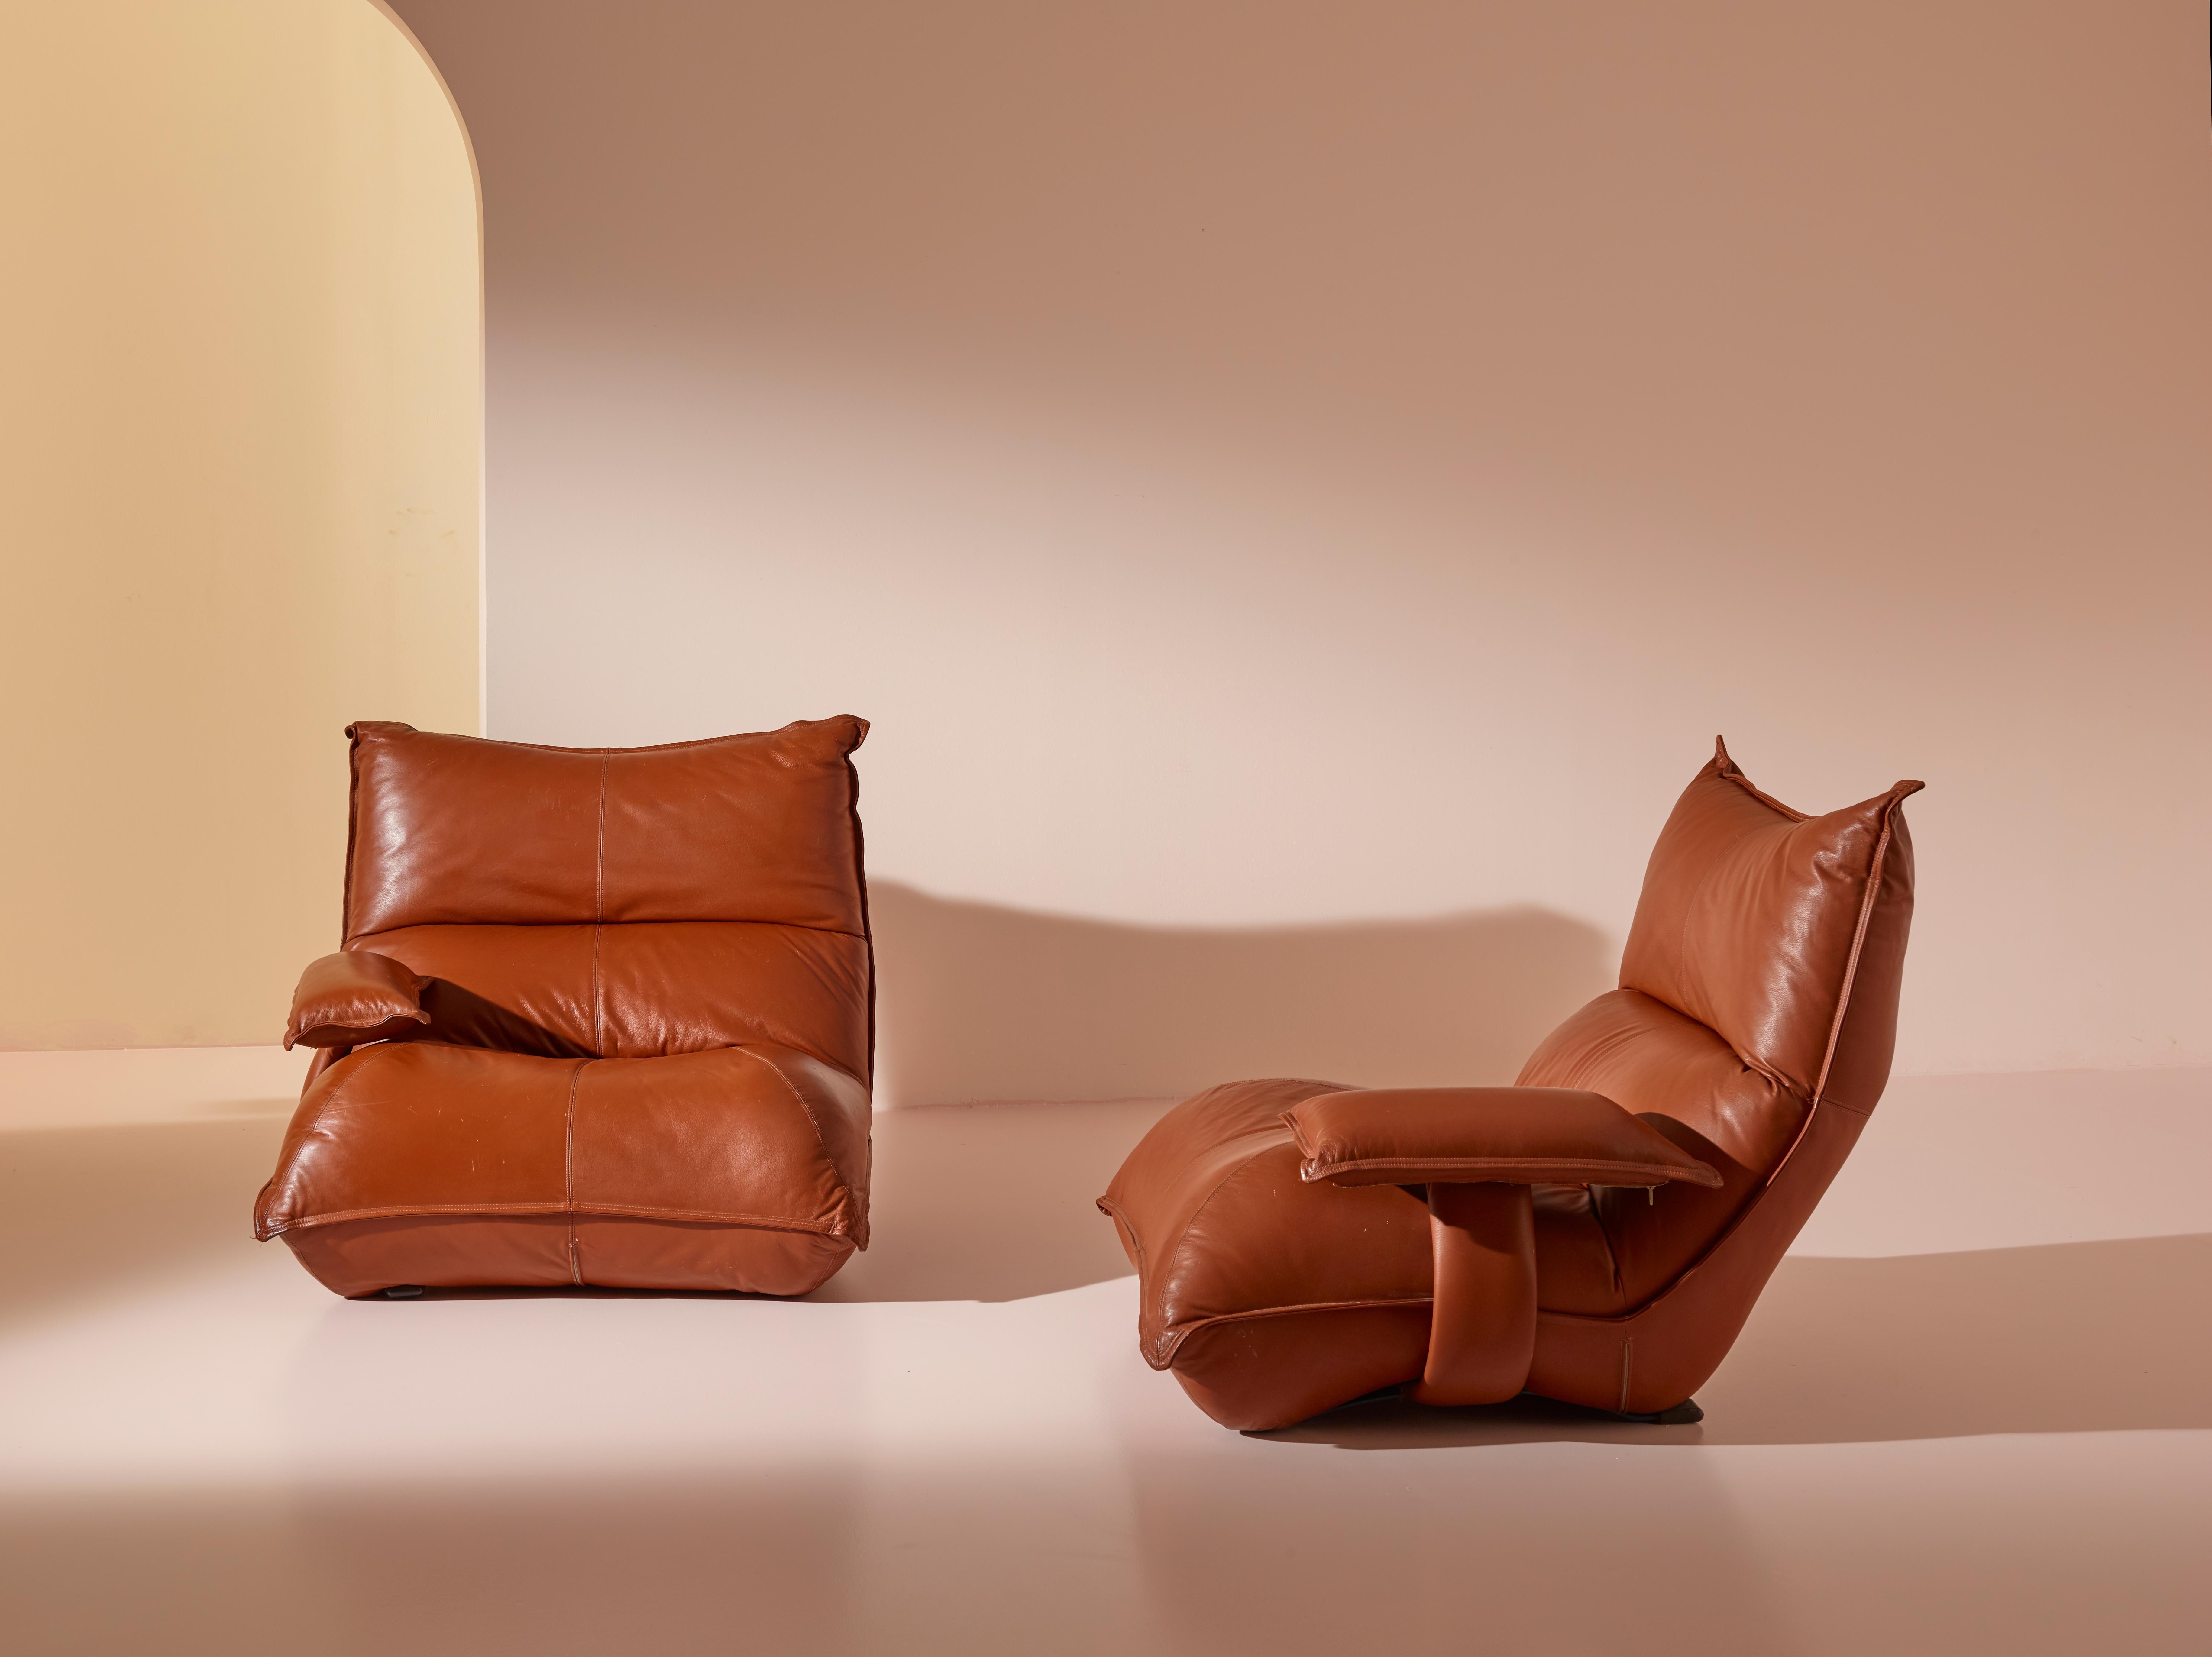 A beautiful pair of Italian lounge chairs designed by Vittorio Varo in the 1960s for Plan Interior Design embodies a captivating space-age aesthetic, capturing the essence of an era marked by innovation and open design.

These chairs feature a